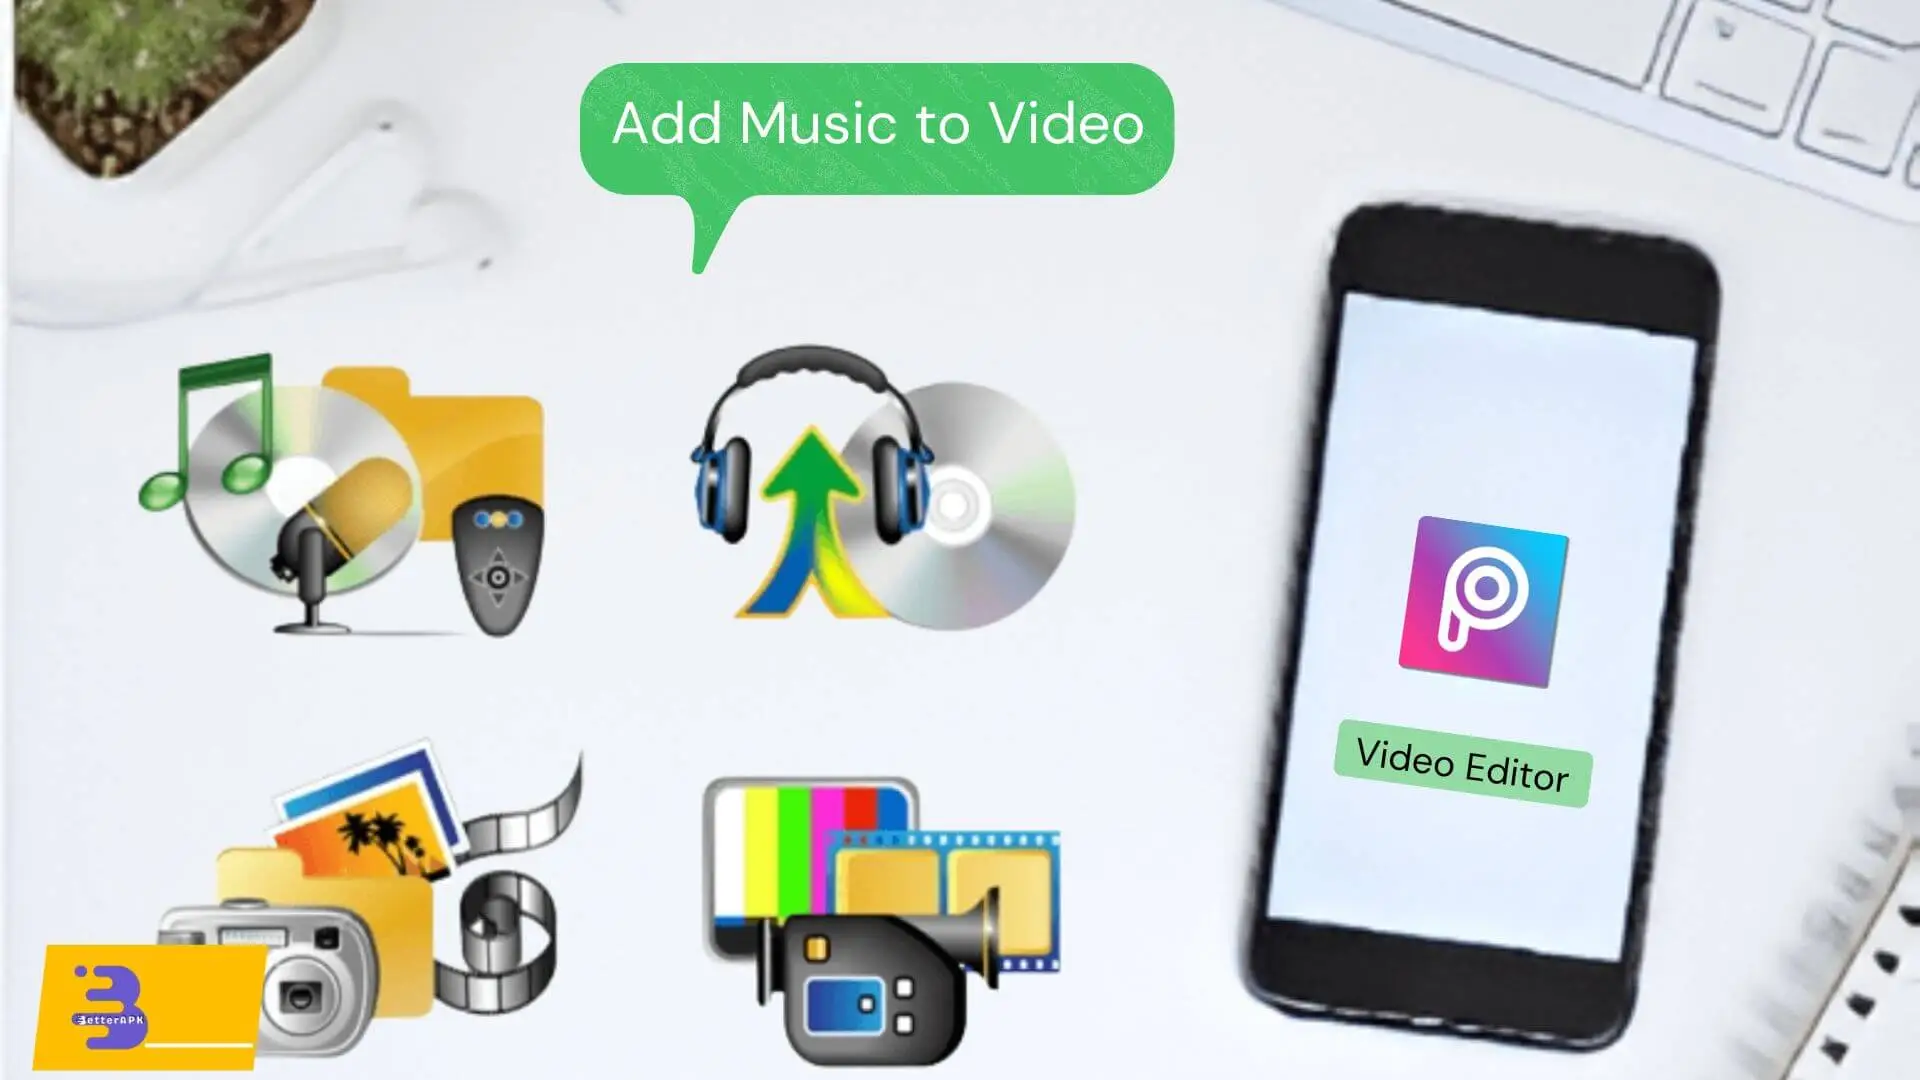 Add Music to Video in PicsArt